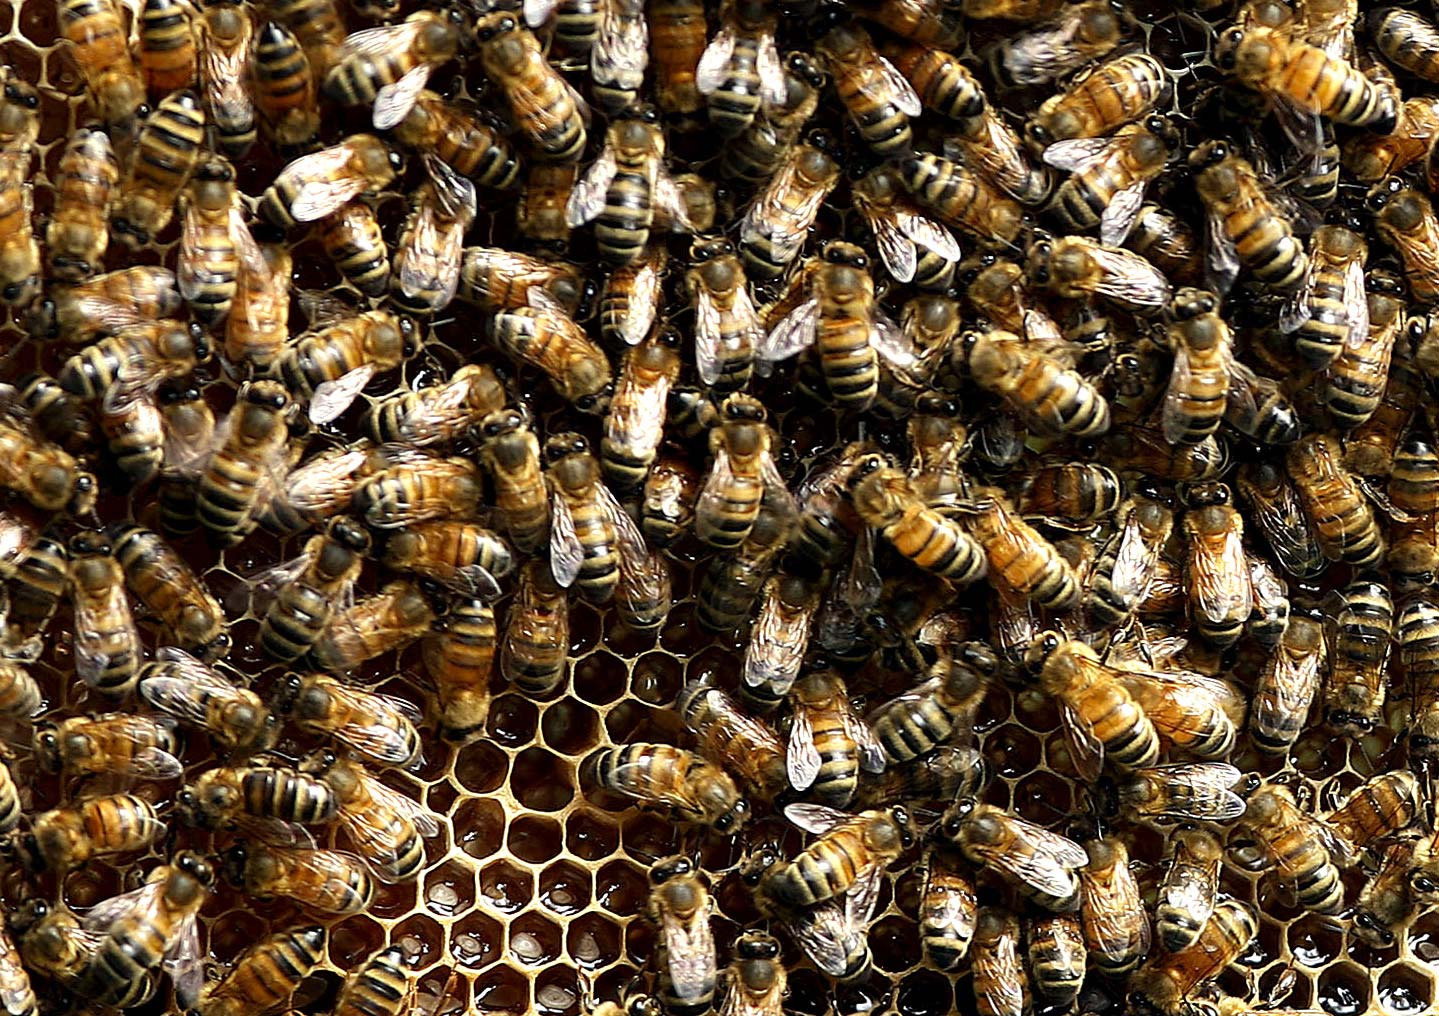 Bees crawl over a honeycomb section removed from one the bee